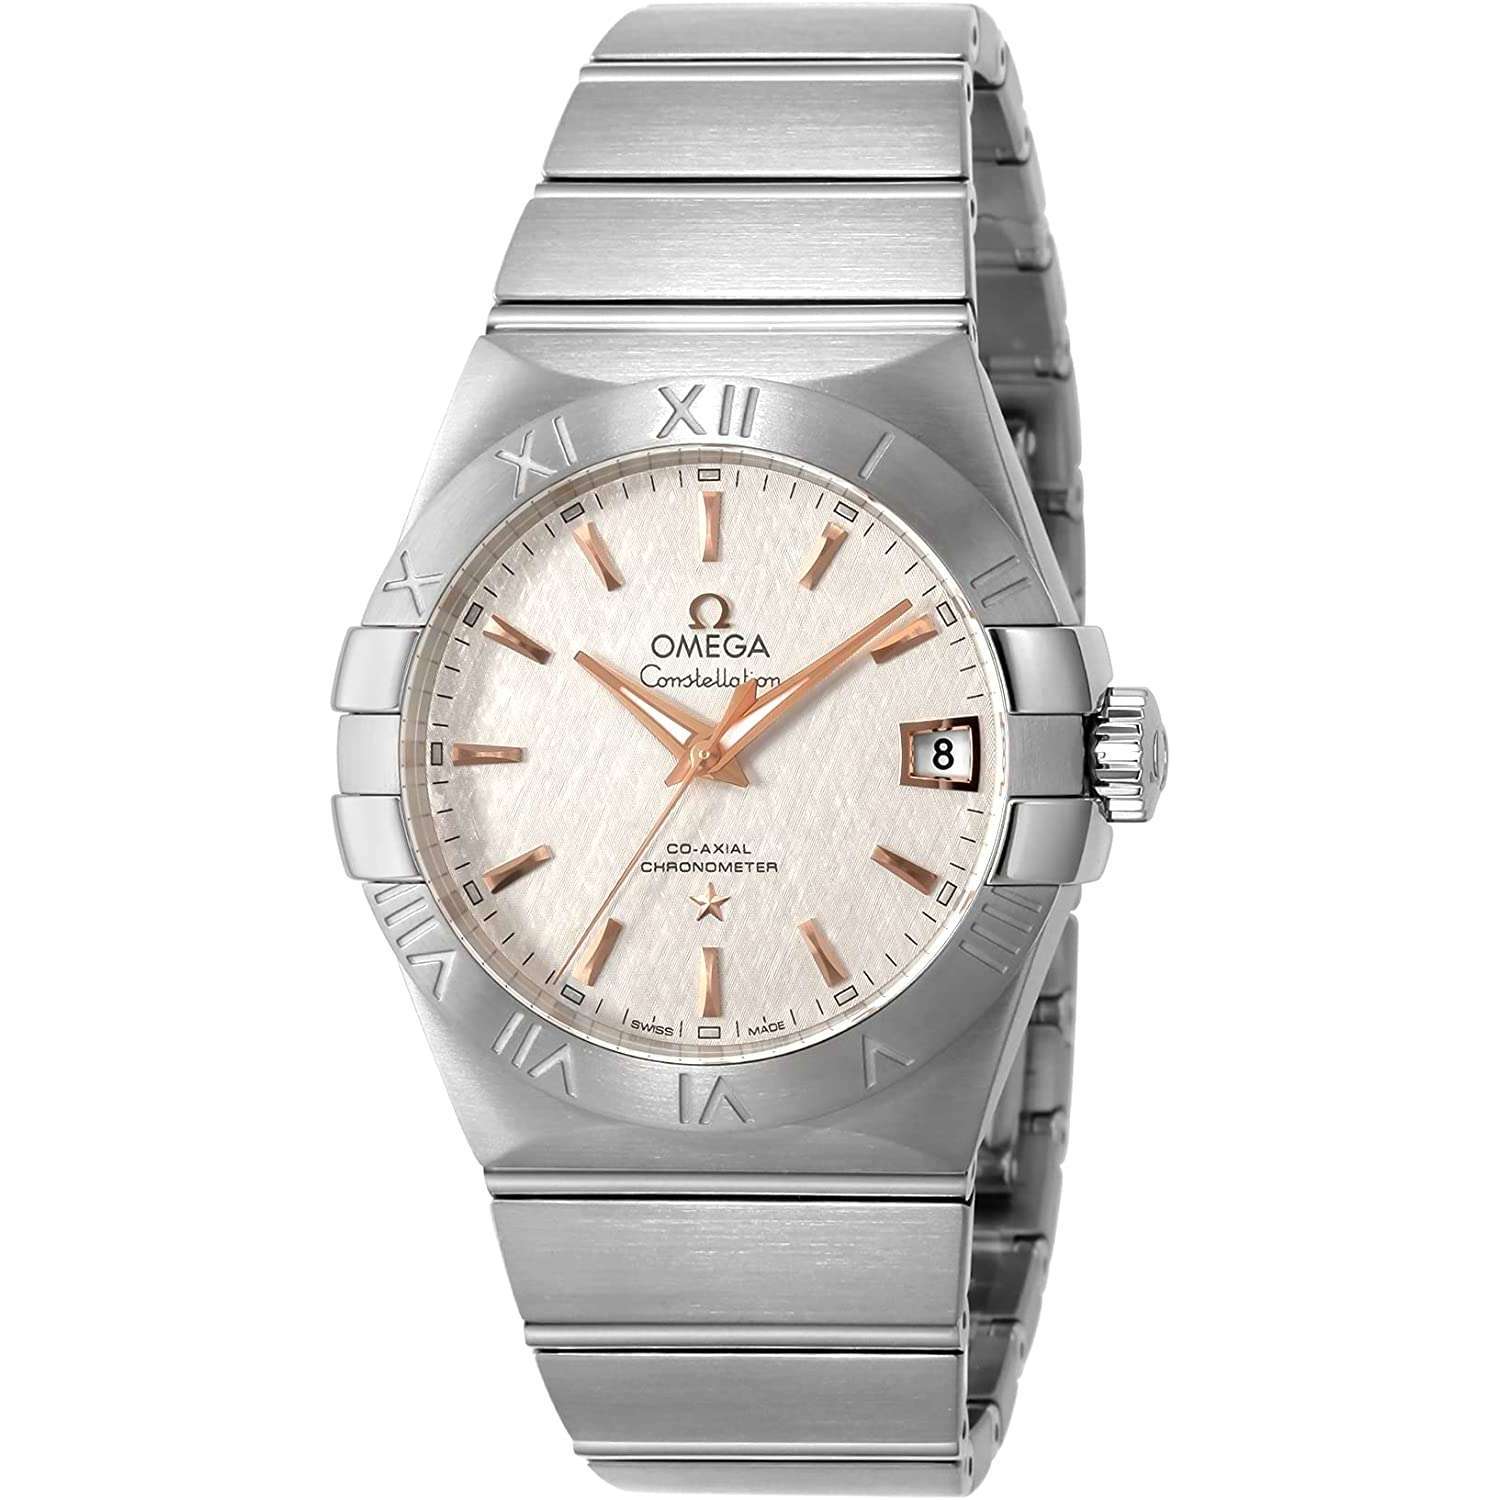 ROOK JAPAN:OMEGA CONSTELLATION CO-AXIAL CHRONOMETER 38 MM MEN WATCH 123.10.38.21.02.002,Luxury Watch,Omega